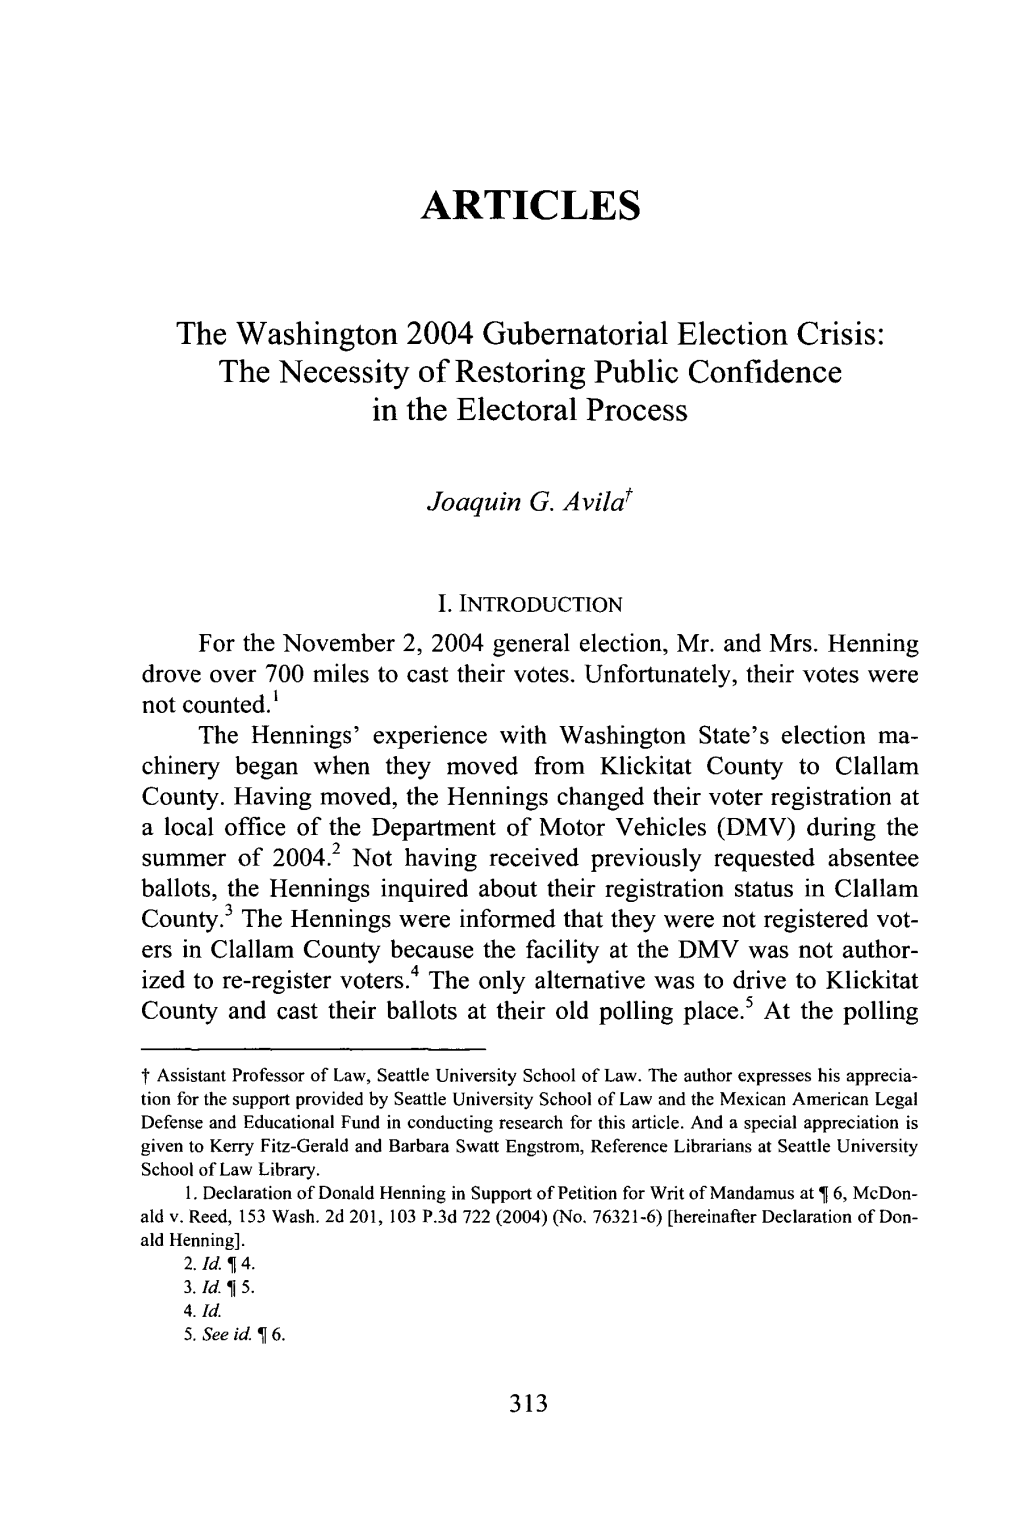 The Washington 2004 Gubernatorial Election Crisis: the Necessity of Restoring Public Confidence in the Electoral Process